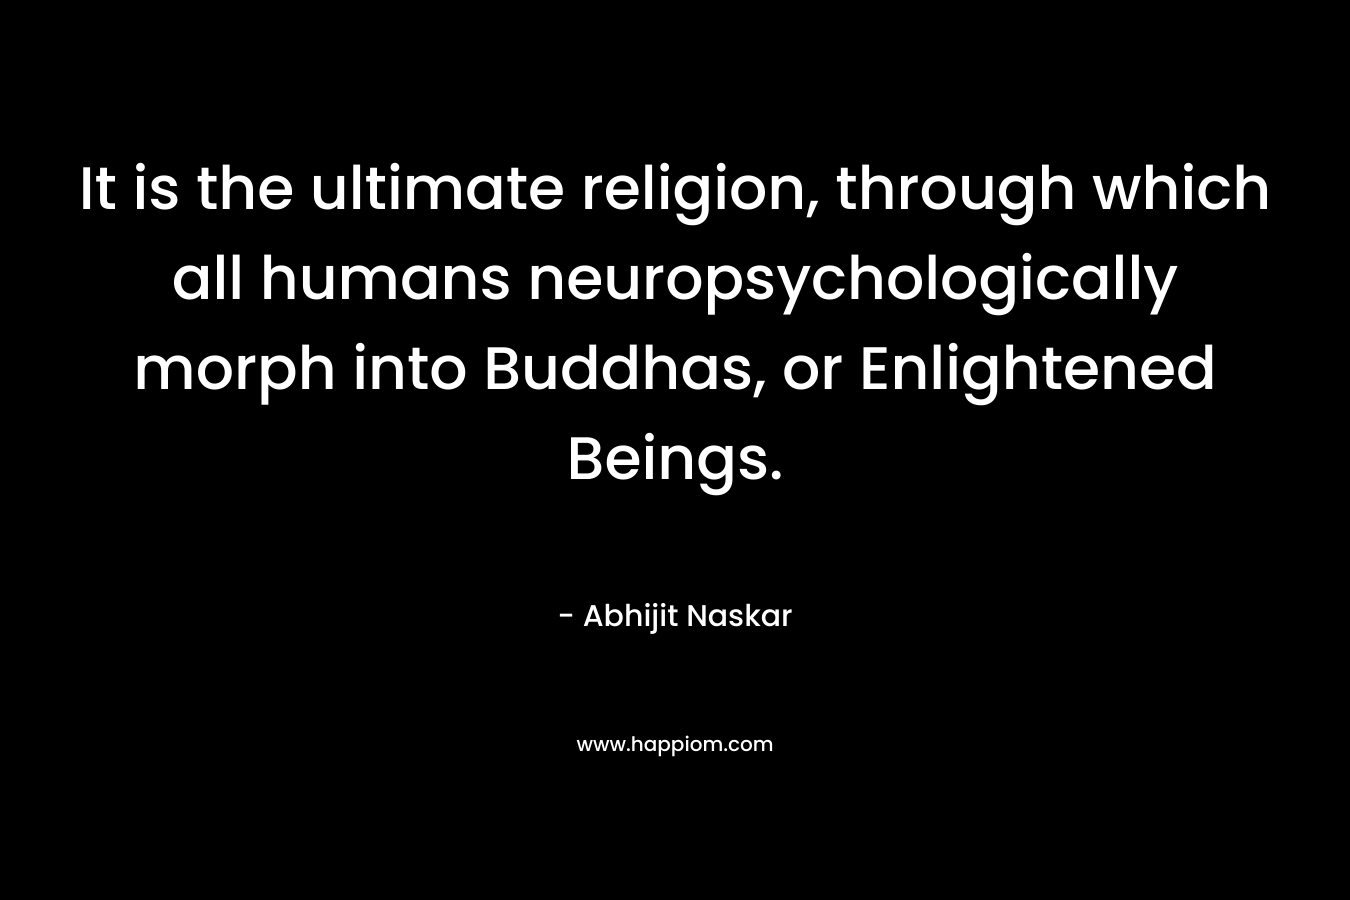 It is the ultimate religion, through which all humans neuropsychologically morph into Buddhas, or Enlightened Beings. – Abhijit Naskar